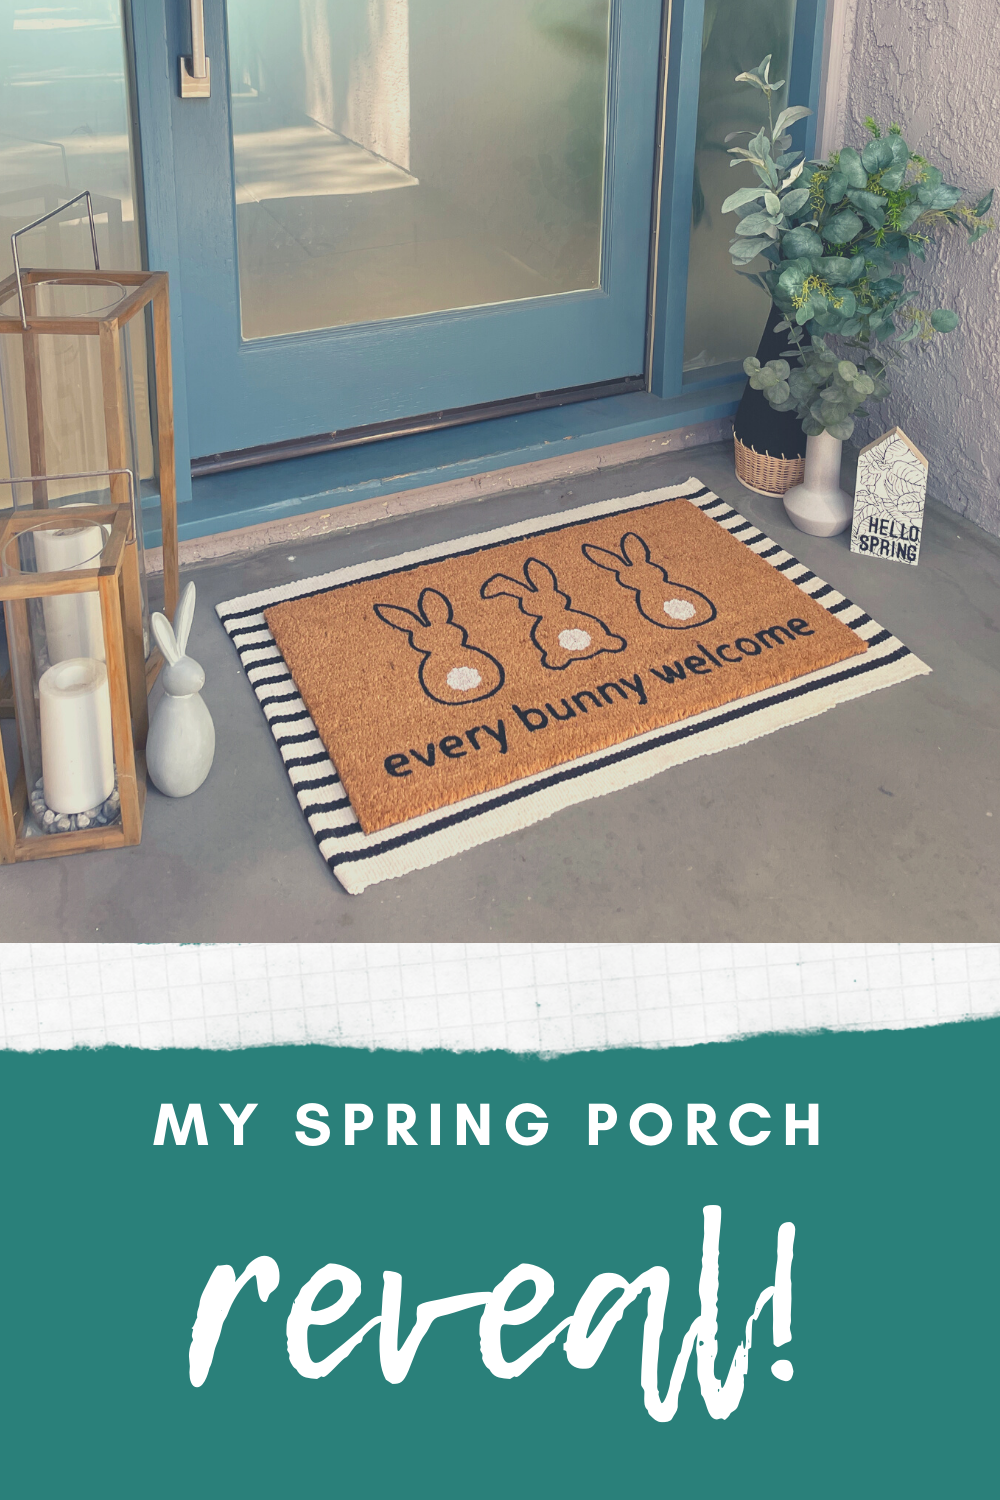 How I decorated my spring porch this year!